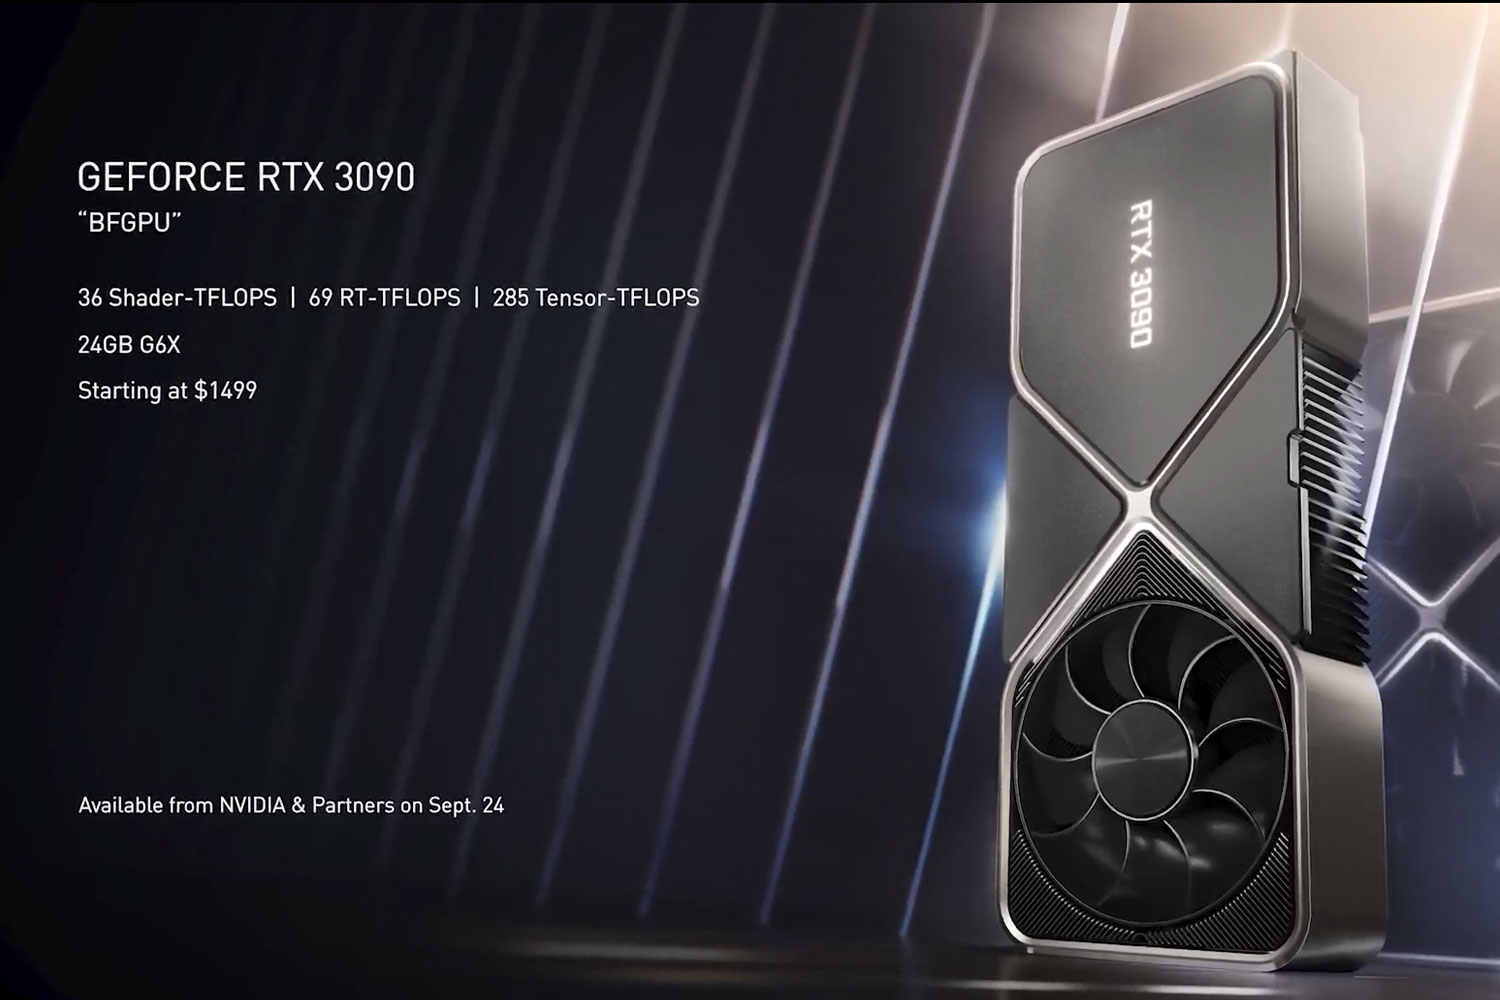 Nvidia RTX 3090 vs. 2080 Ti: The Most Powerful Gaming GPUs